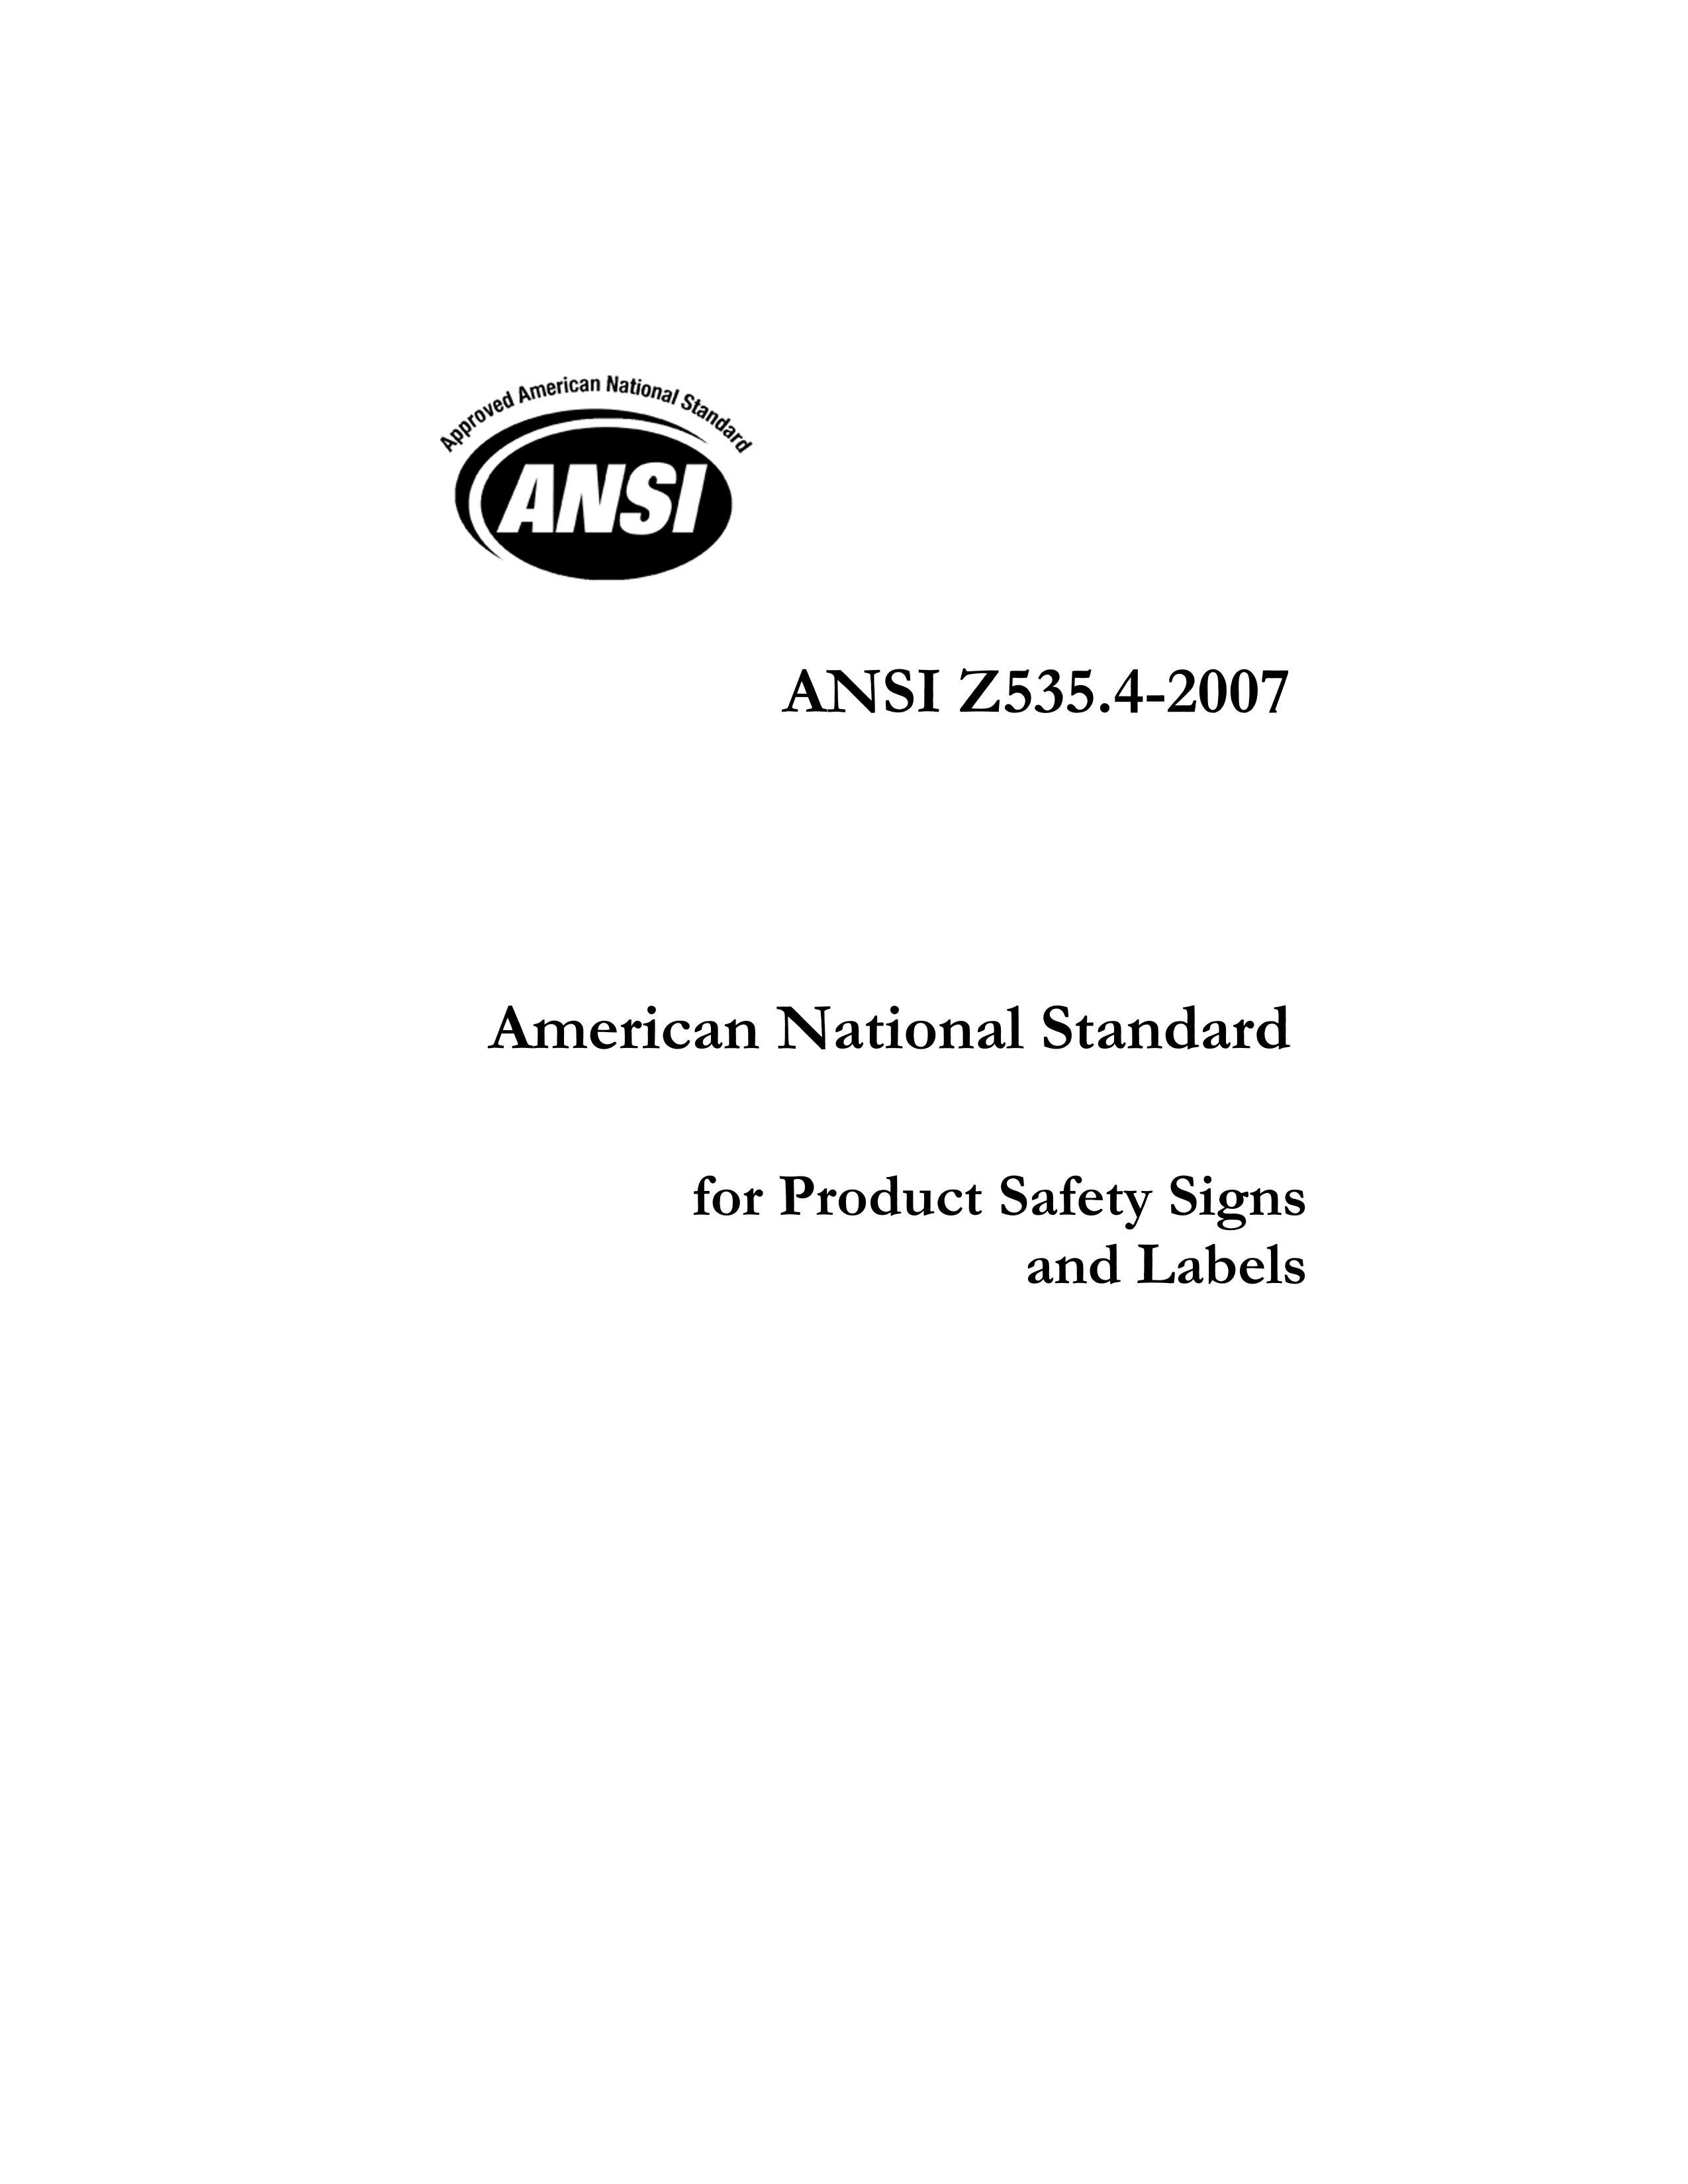 ANSI Z535.4-2007 American National Standard for Product Safety Signs and Labels.pdf1ҳ